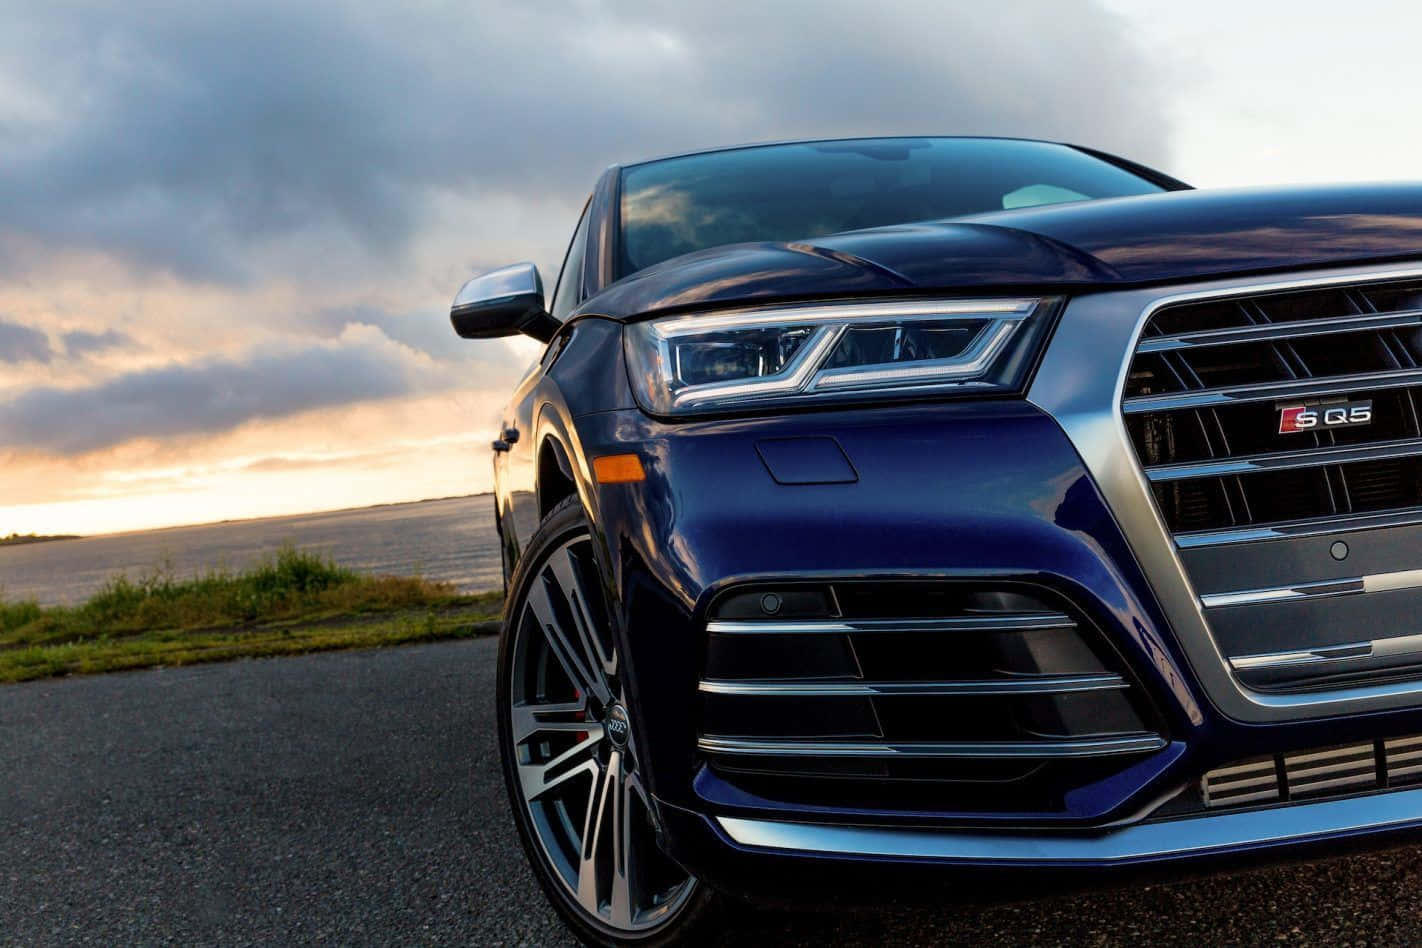 Audi SQ5 in dynamic action on the open road Wallpaper